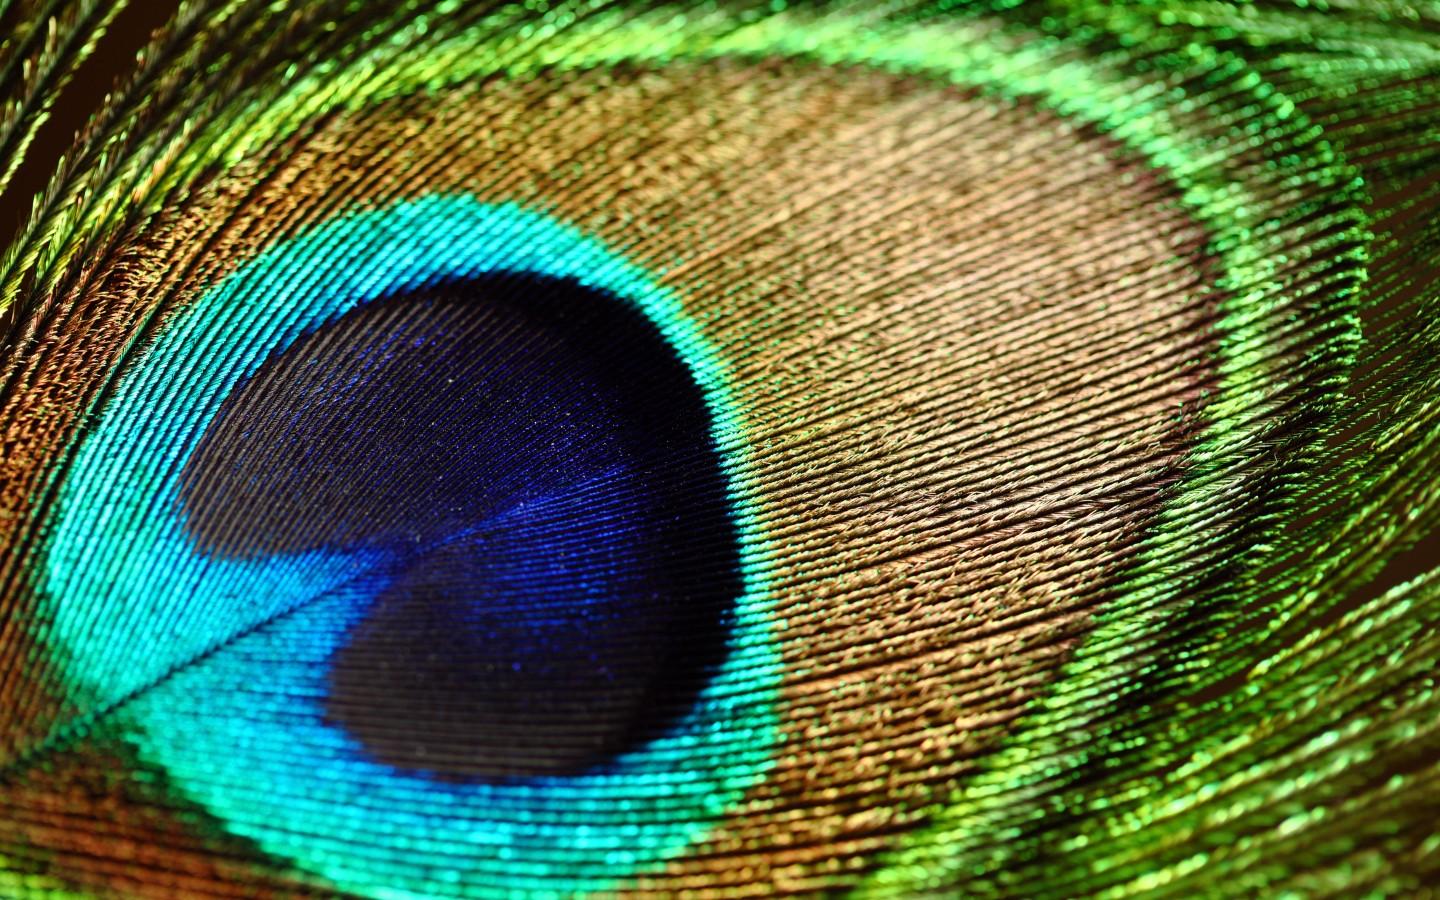 High Resolution Peacock Feather - HD Wallpaper 